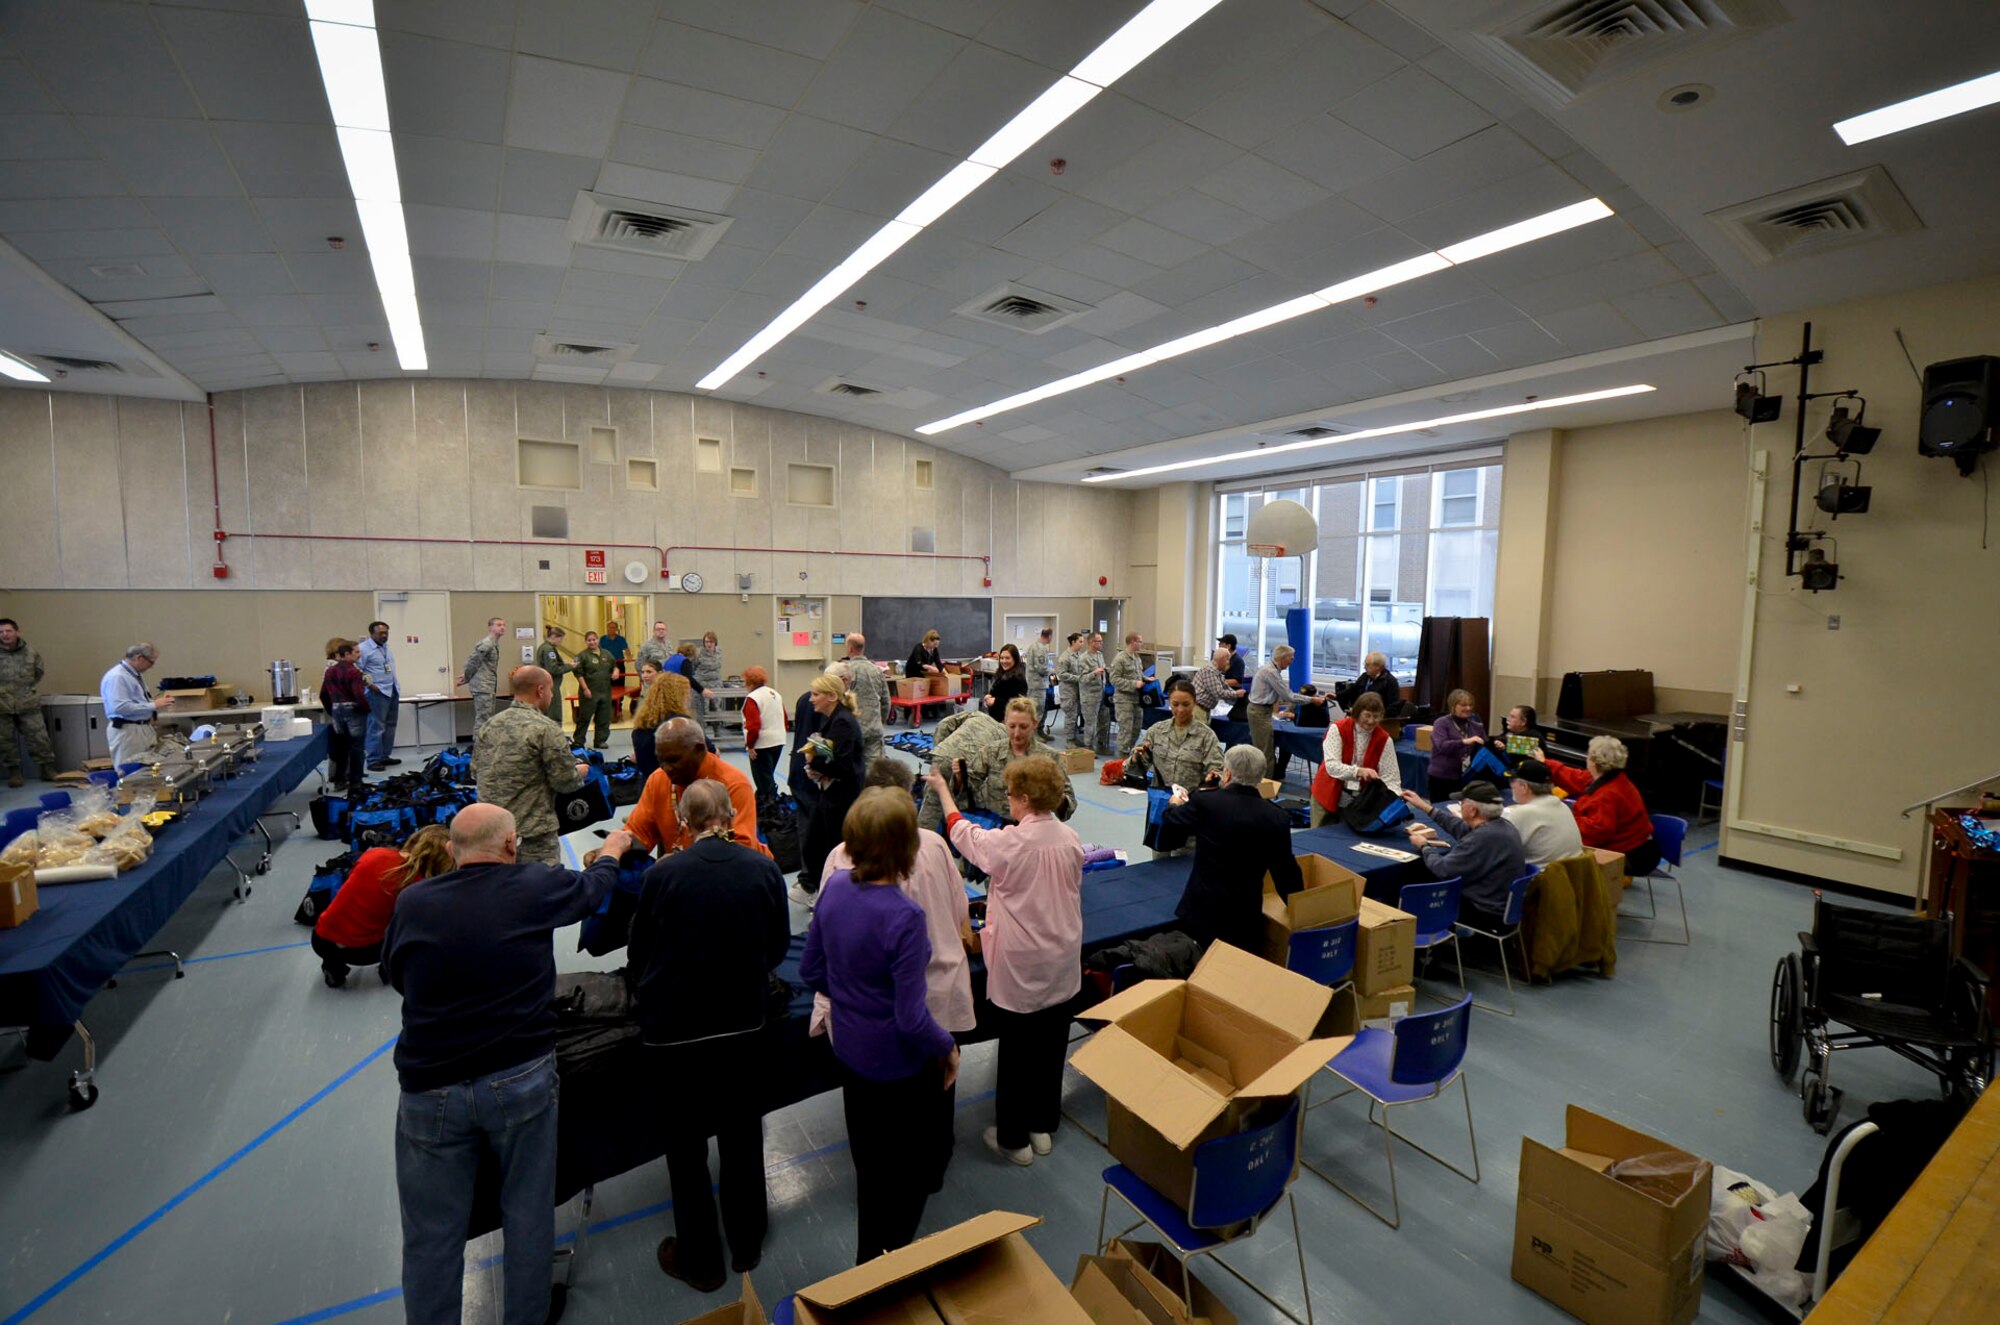 U.S. Airmen with the 128th Air Refueling Wing help assemble gifts to pass out to patients at the Clement J. Zablocki VA Medical Center, Milwaukee Dec. 10, 2014.  (U.S. Air National Guard photo by Tech. Sgt. Jenna Lenski/Released)